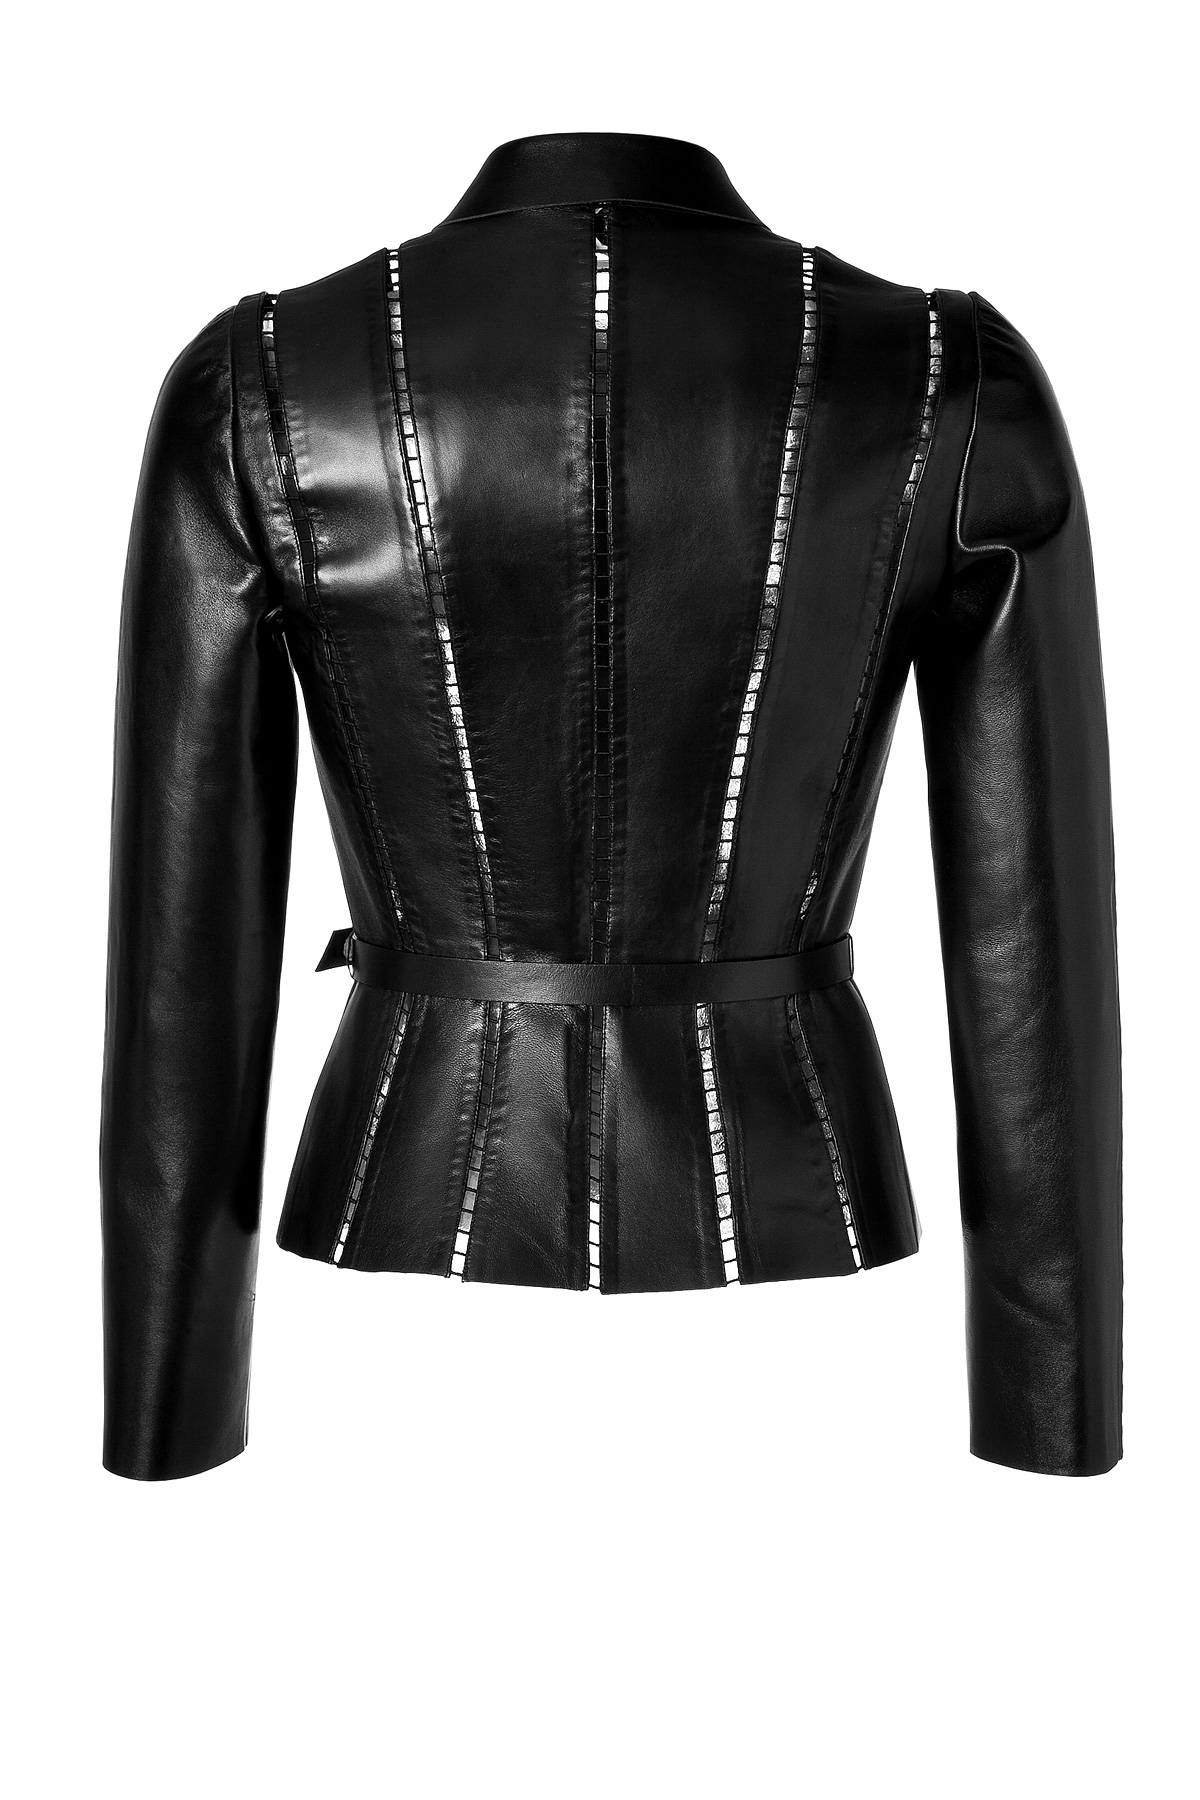 Lyst - Valentino Black Leather Jacket With Cutout Trim in Black